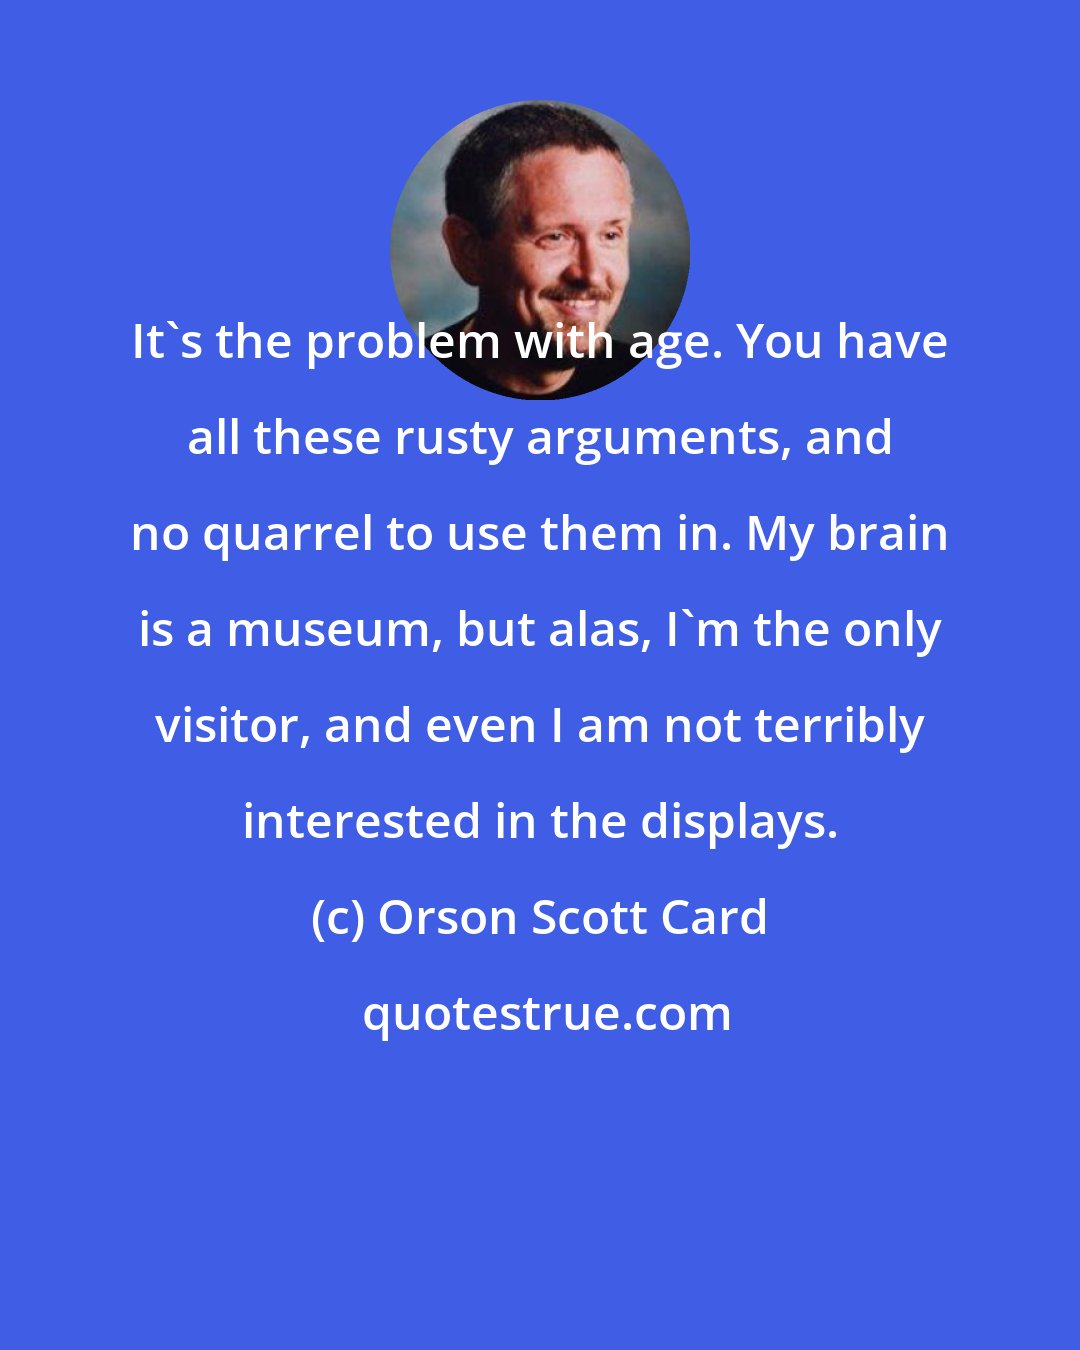 Orson Scott Card: It's the problem with age. You have all these rusty arguments, and no quarrel to use them in. My brain is a museum, but alas, I'm the only visitor, and even I am not terribly interested in the displays.